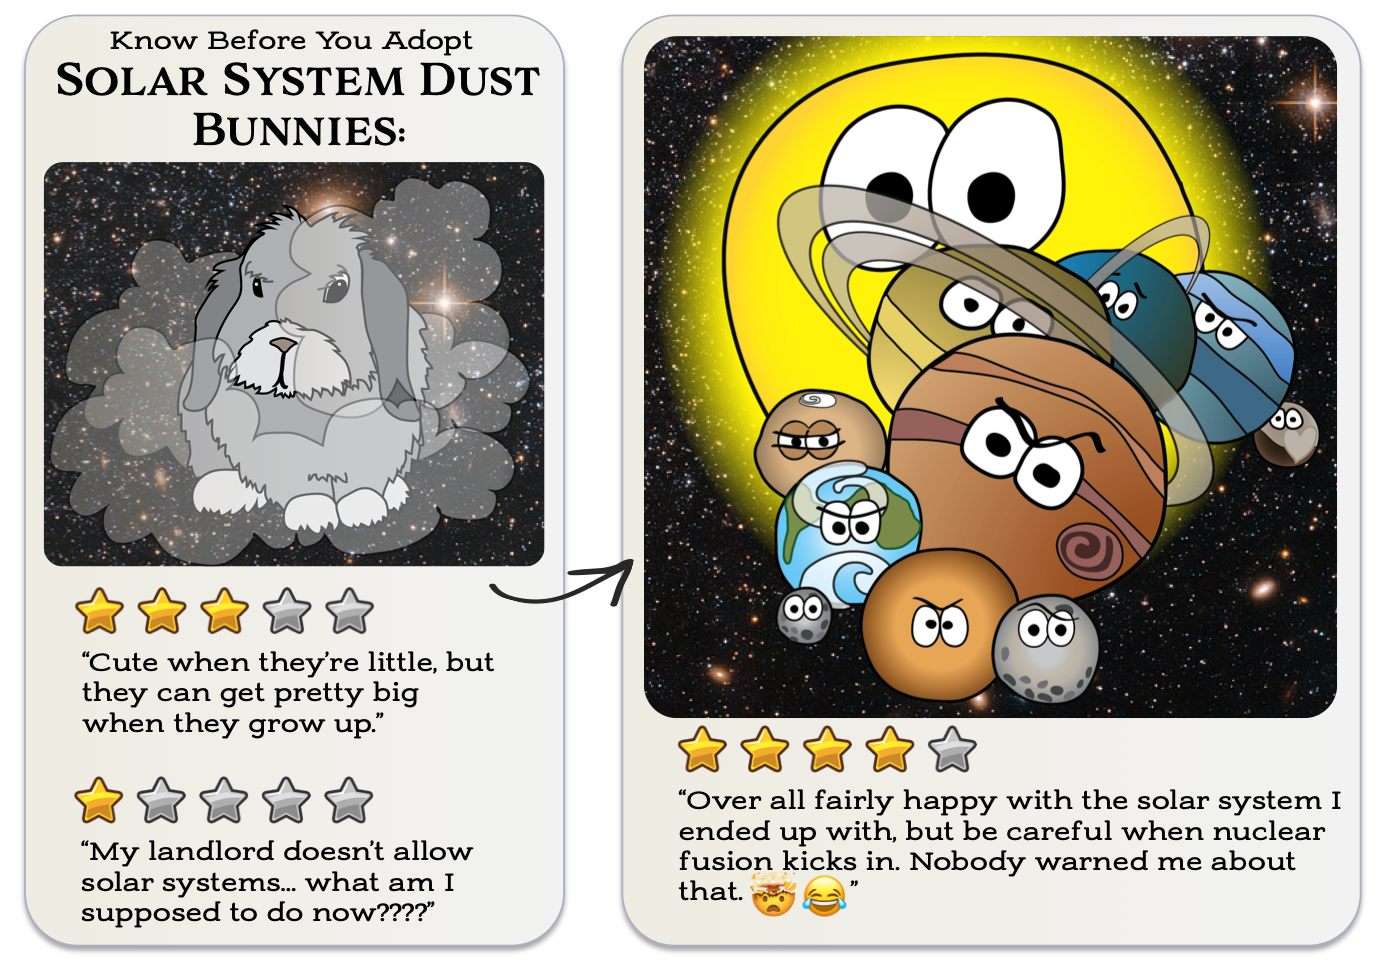 Image of a dusty bunny next to an image of a cartoon solar system.